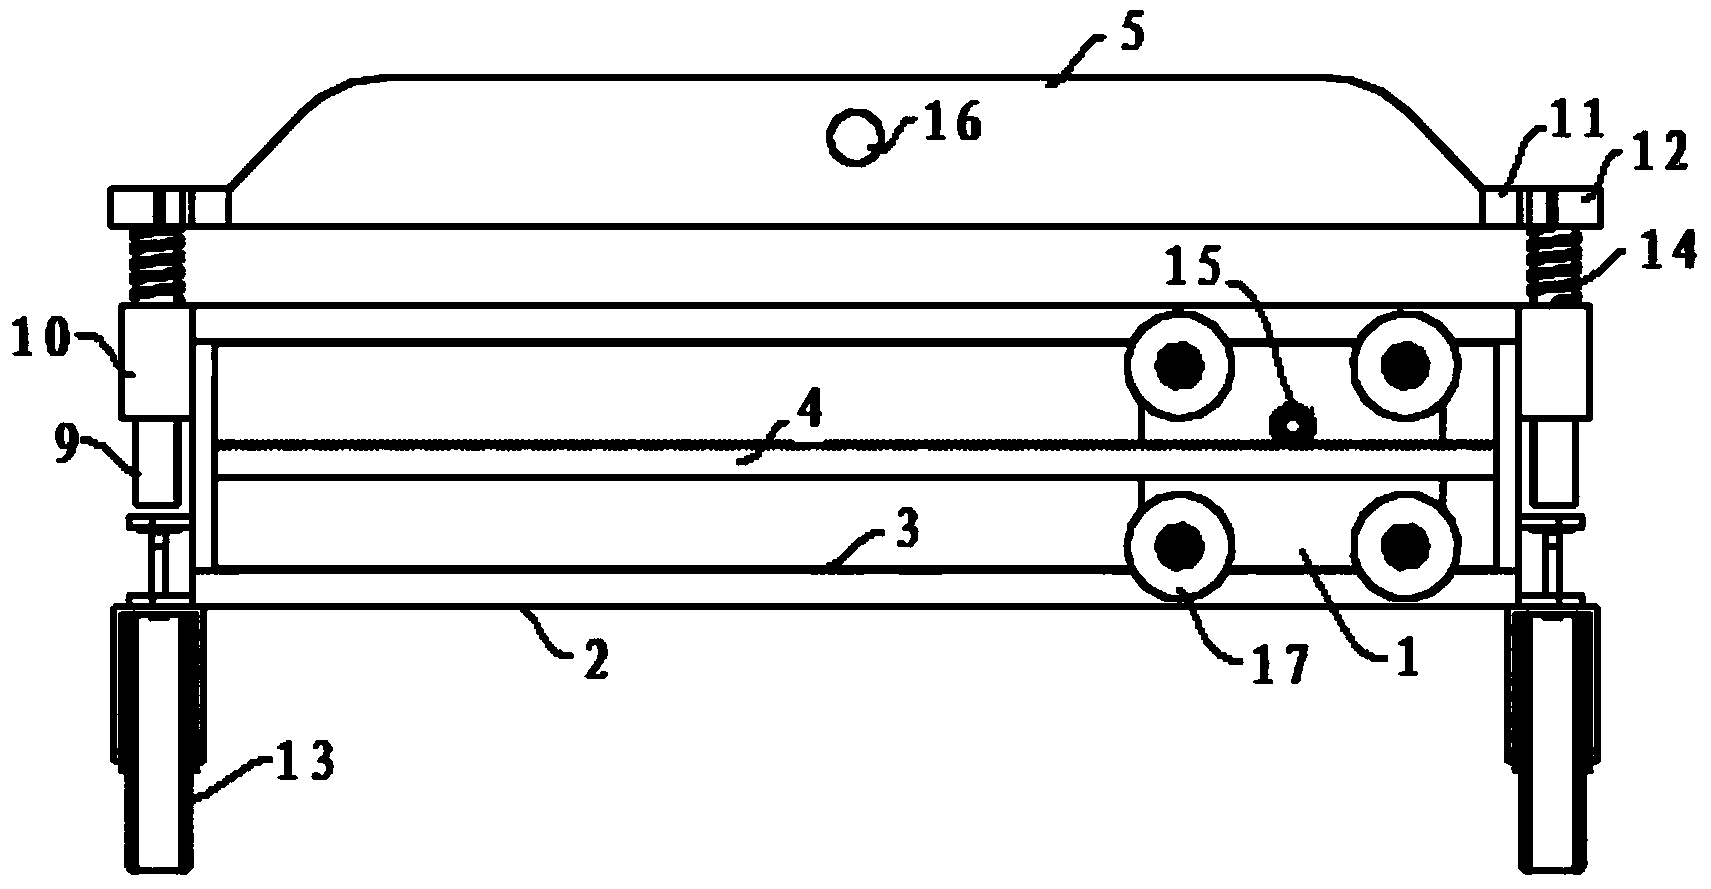 Hedgerow trimmer bearing mechanism with self-adapting function